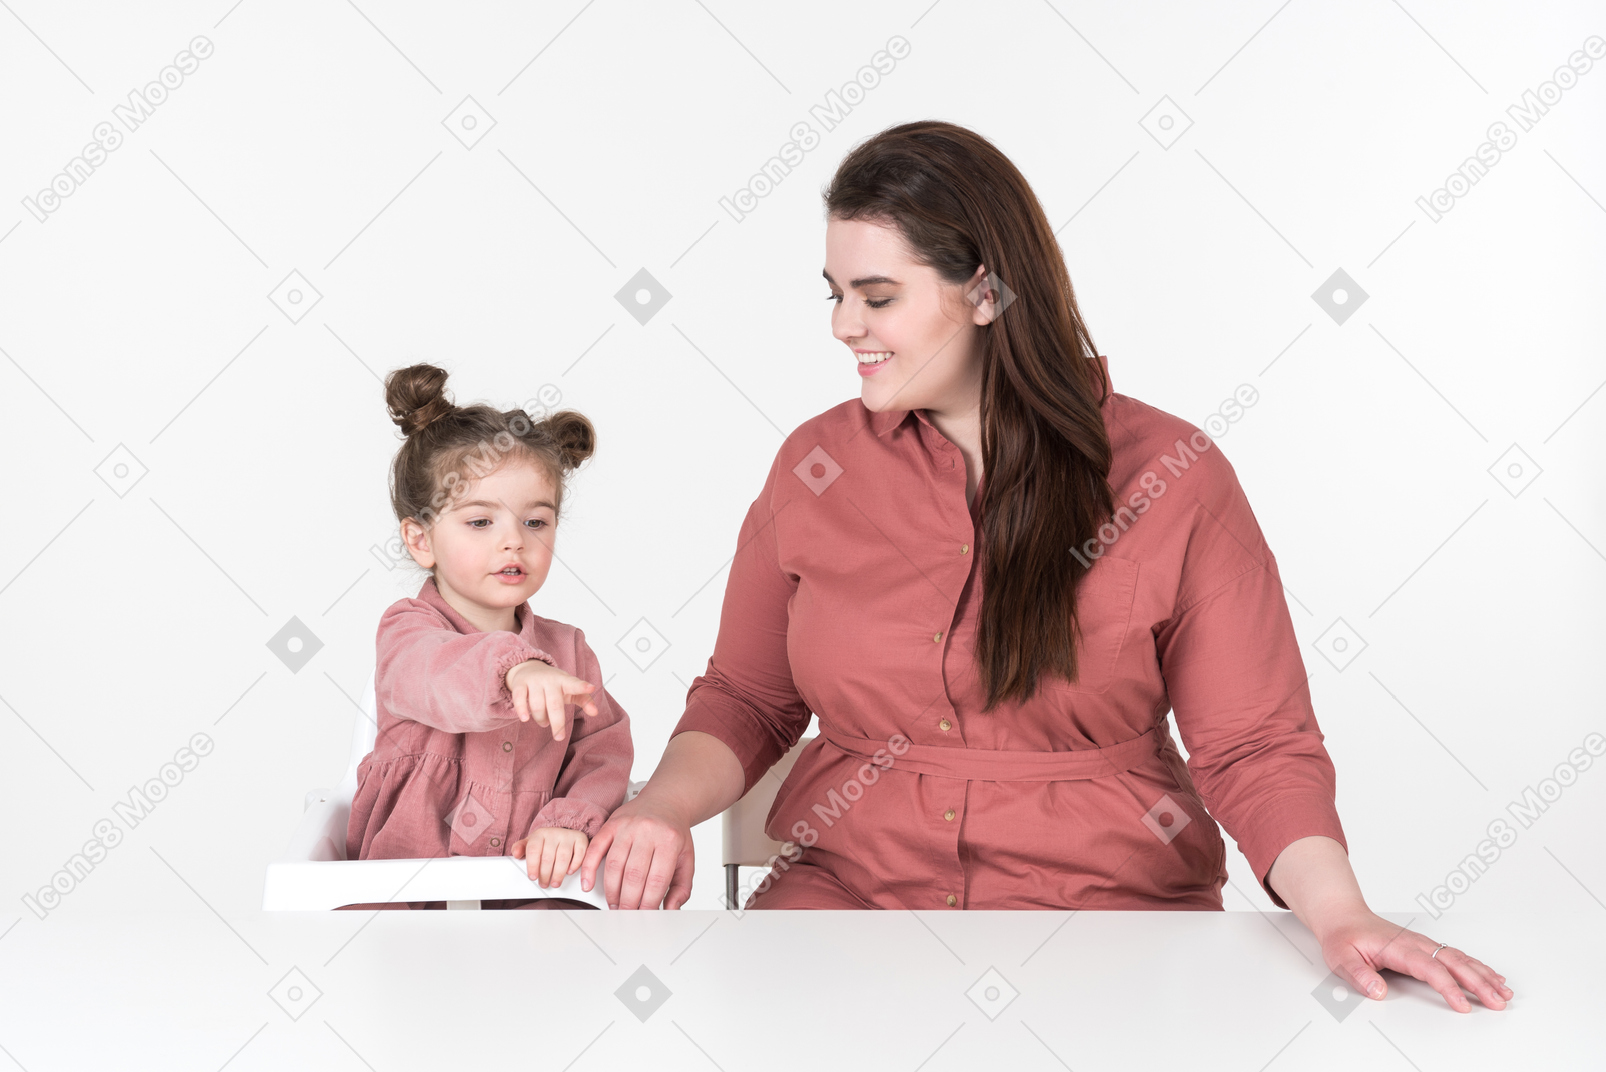 Mother and her little daughter, wearing red and pink clothes, sitting at the dinner table